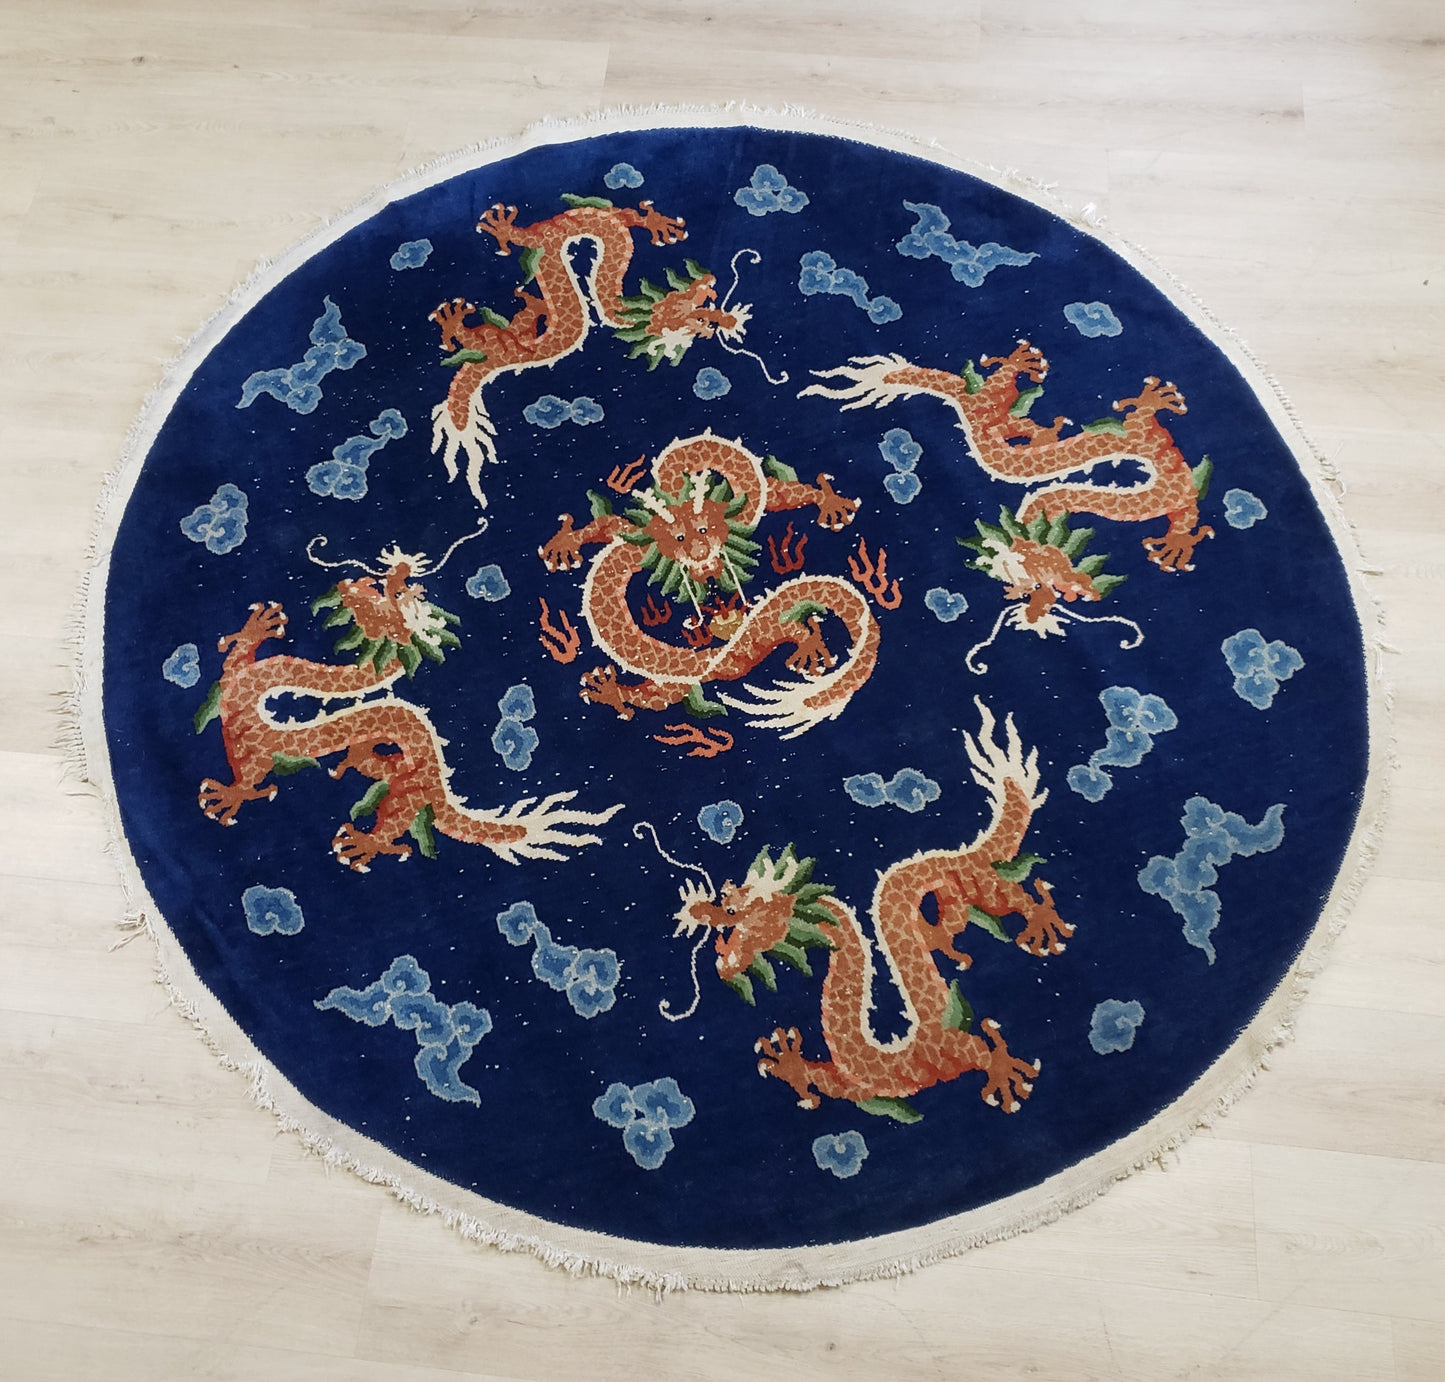 SOLD - Chinese Dragon Rug, Round, 6' diameter, "Antique Dragon Sky"